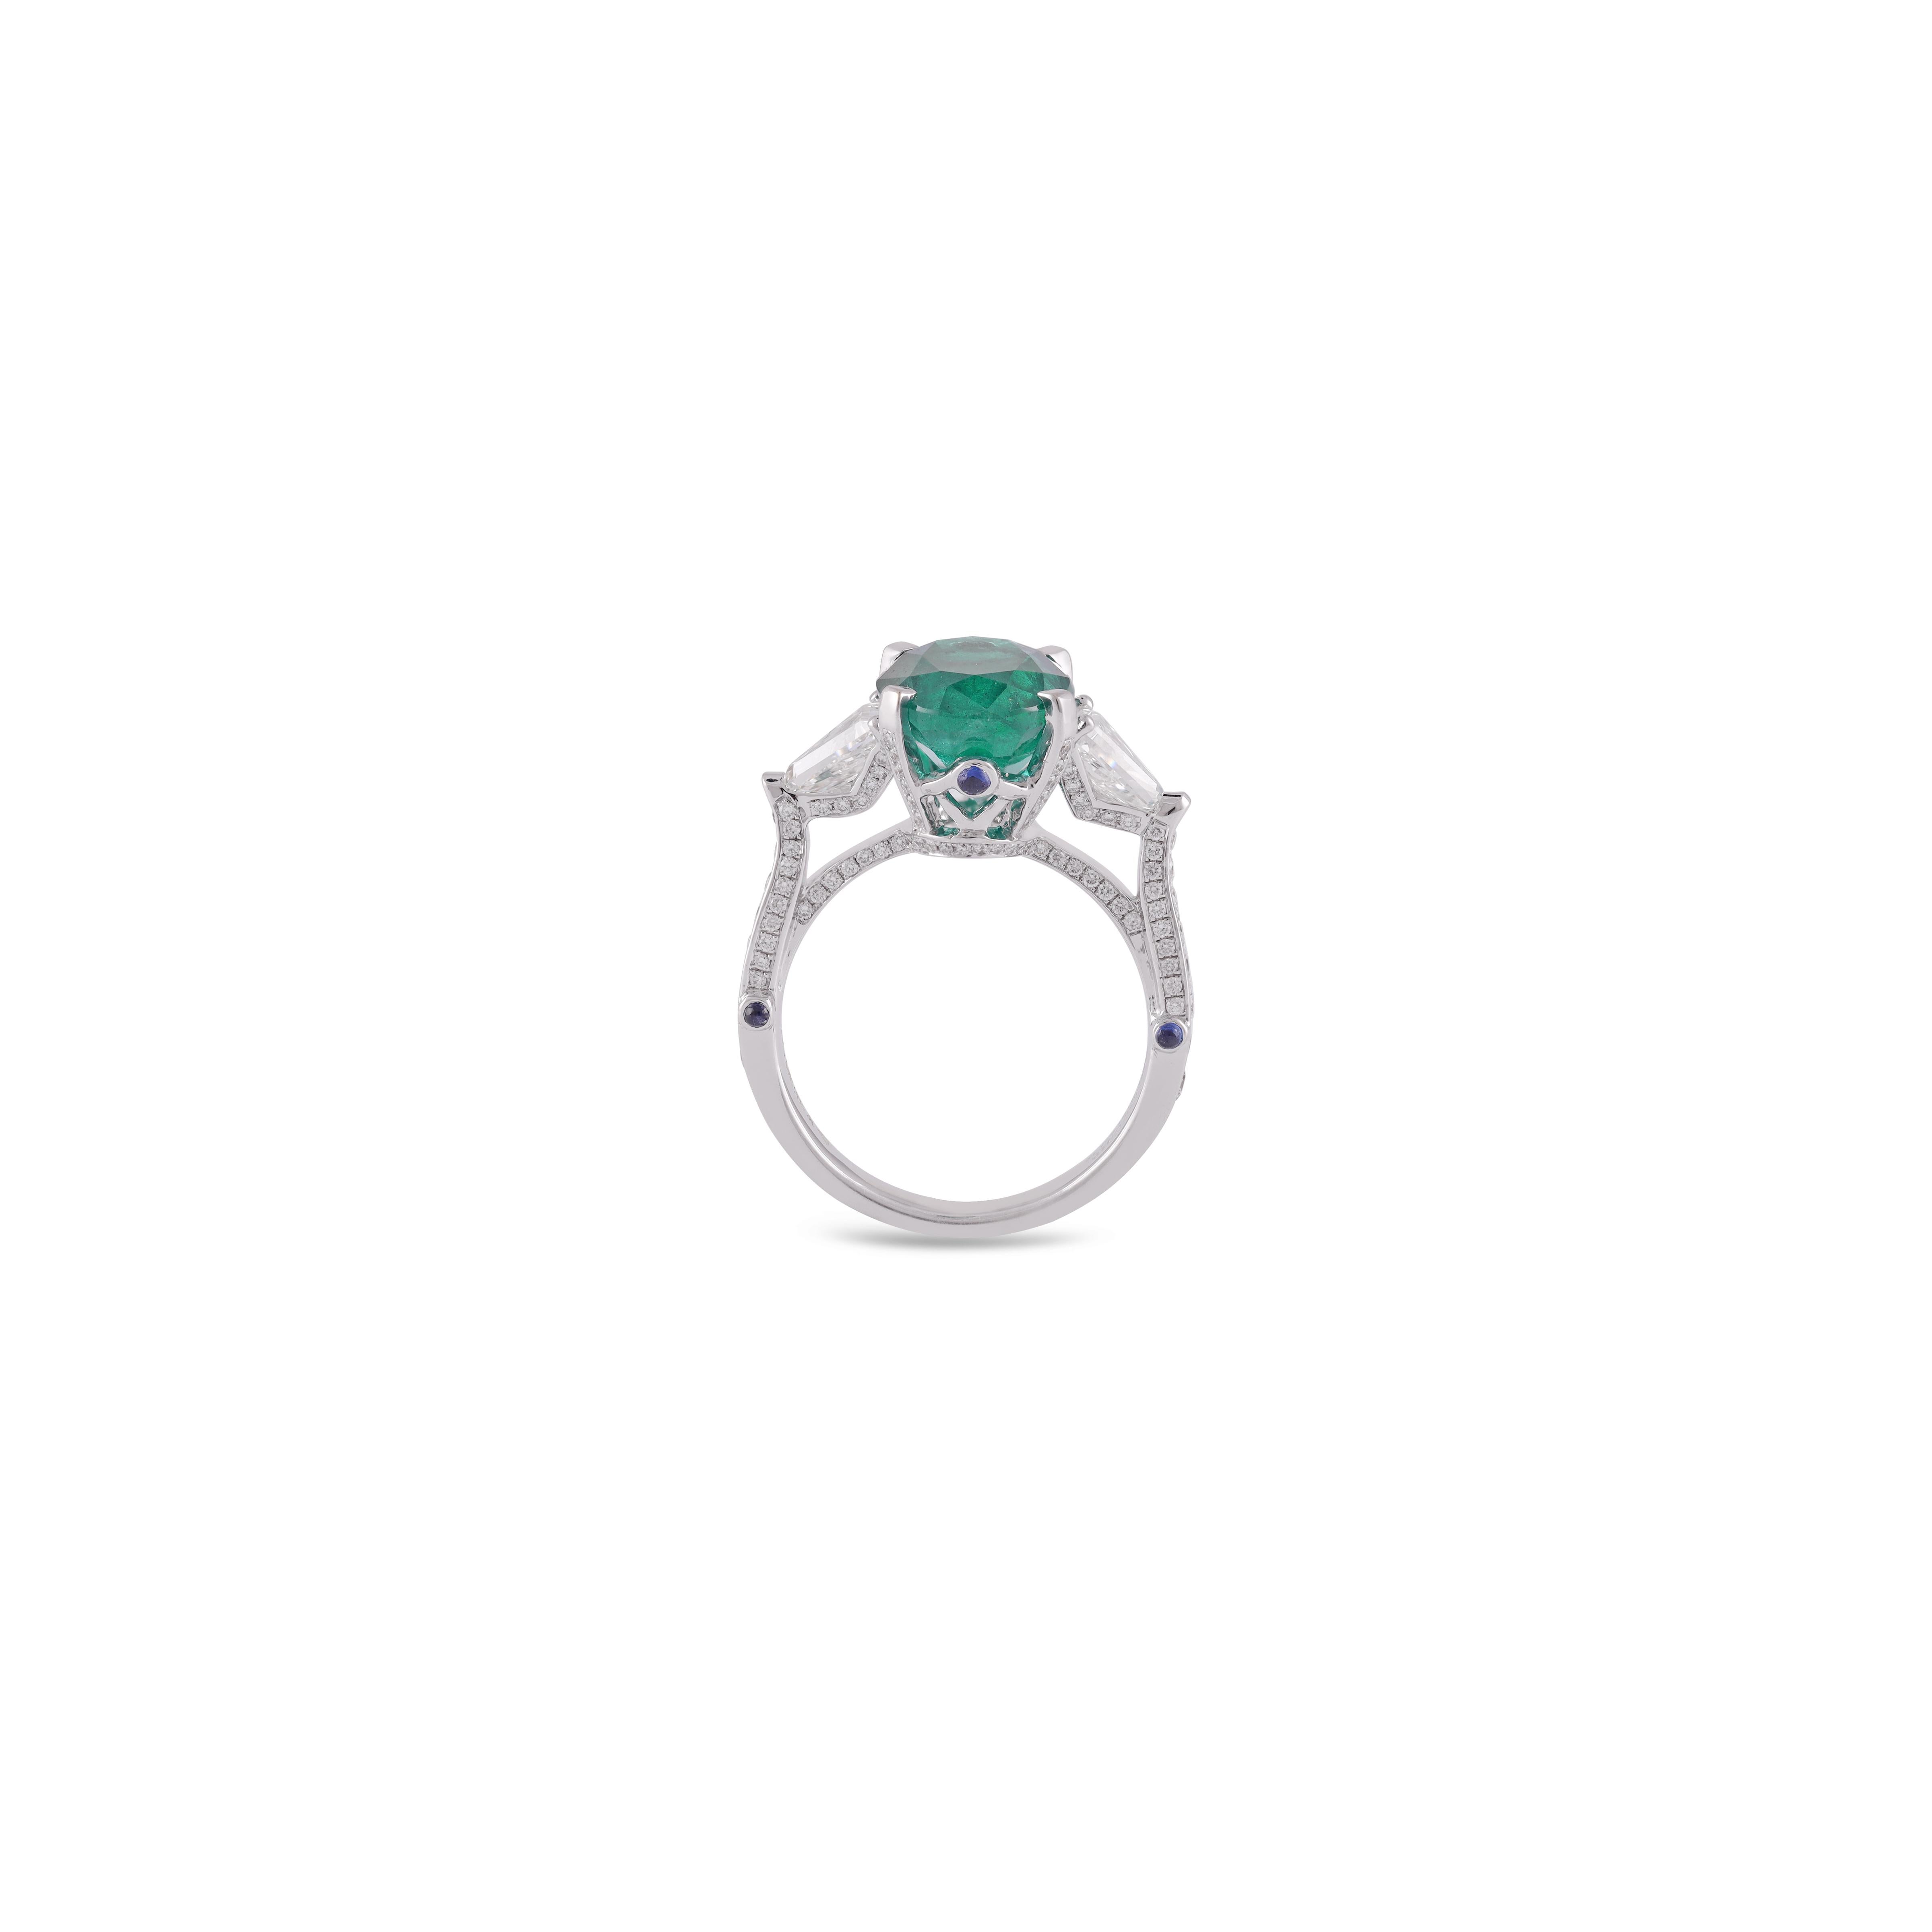 This is an elegant emerald & diamond Crown ring studded in 18k white gold with 1 piece of Oval Cut  shaped Zambian emerald weight 4.70 carat which is surrounded by 20 pieces of round shaped diamonds weight 1.49 carat & 6 piece Sapphire 0.14 carat